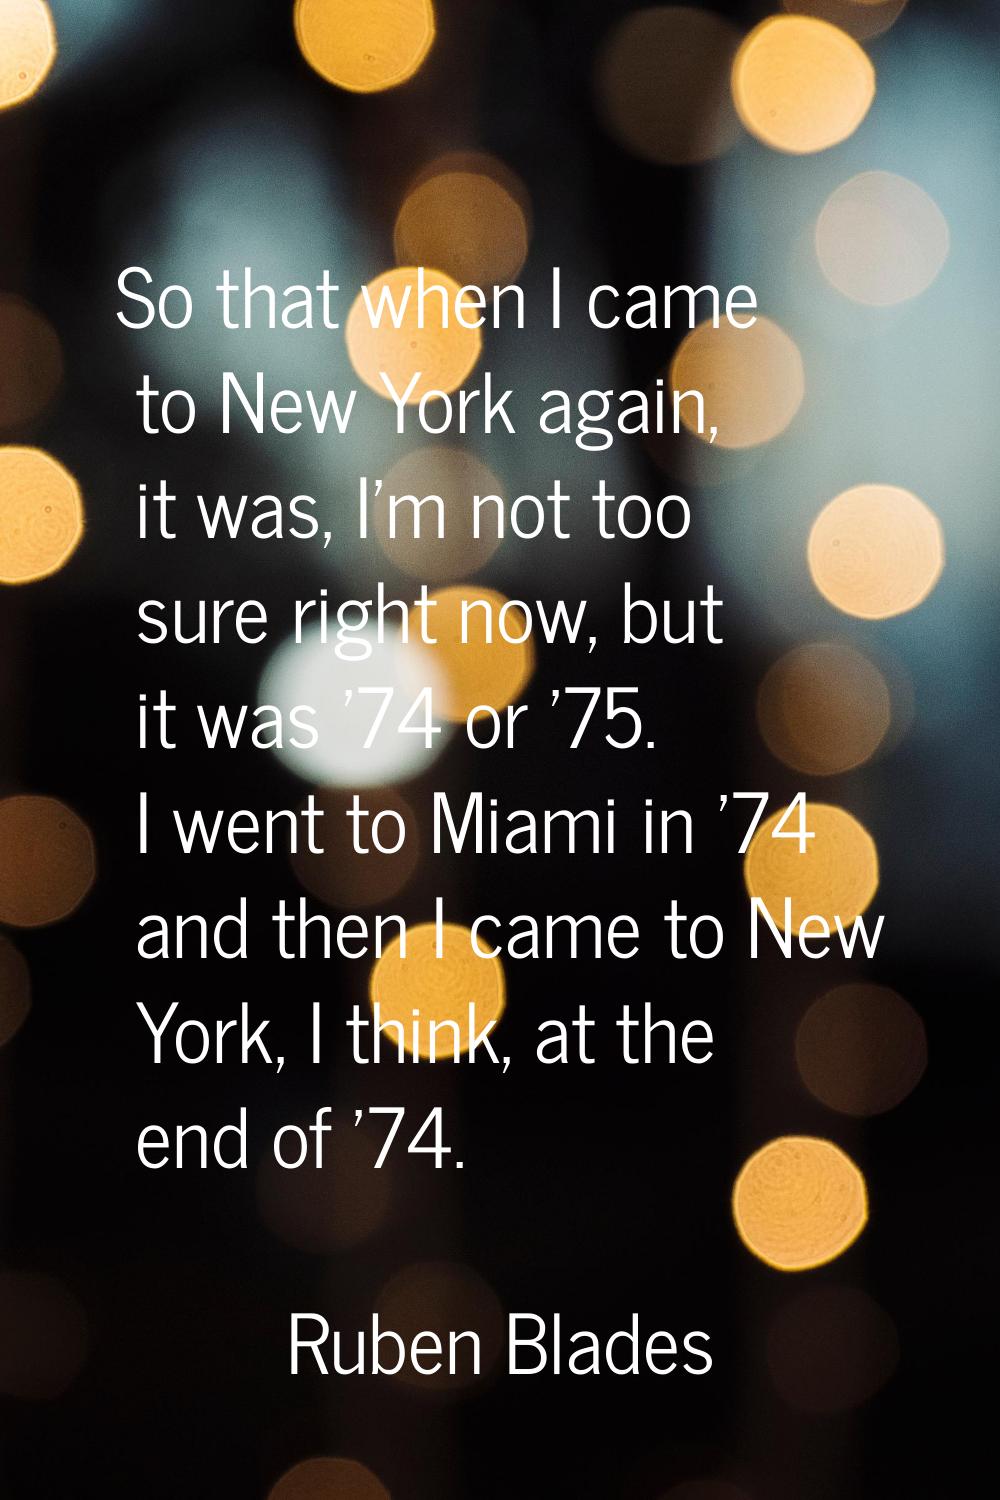 So that when I came to New York again, it was, I'm not too sure right now, but it was '74 or '75. I